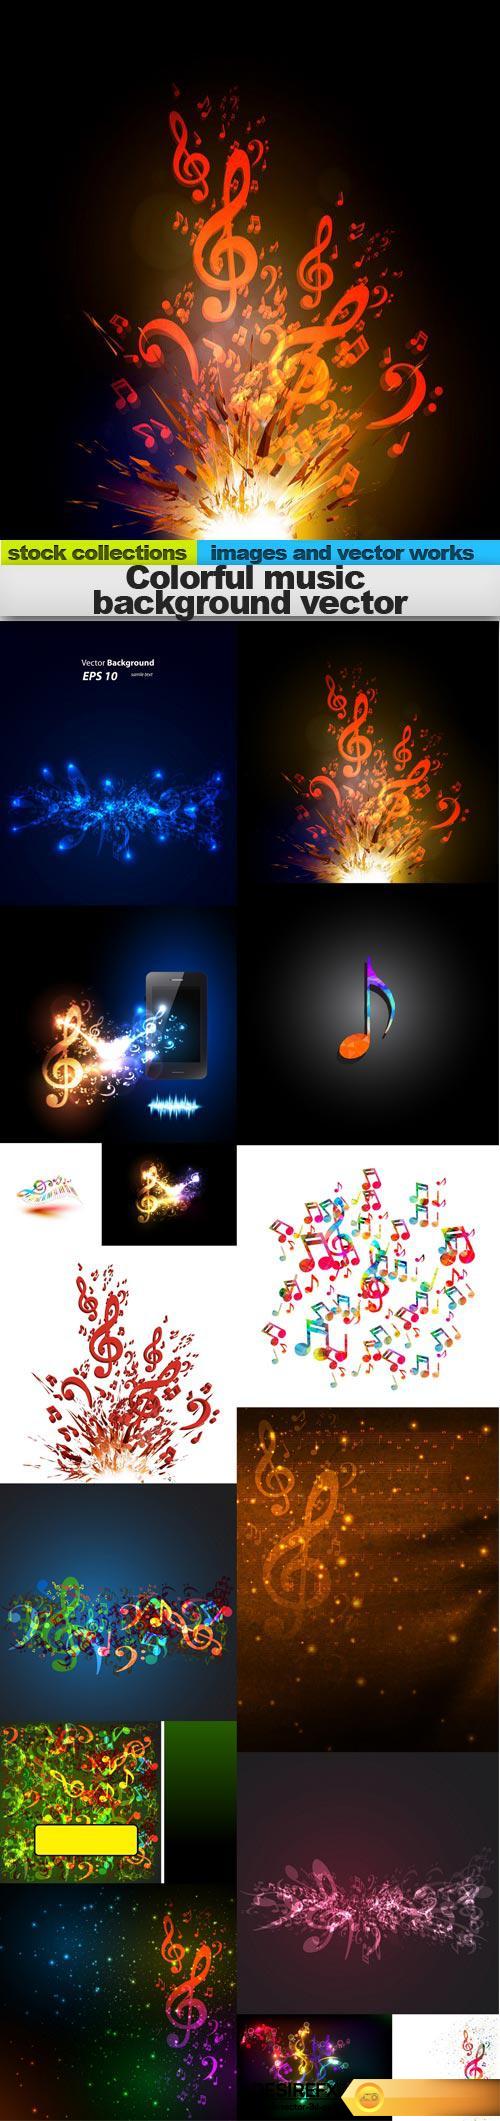 Colorful music background vector, 15 x EPS